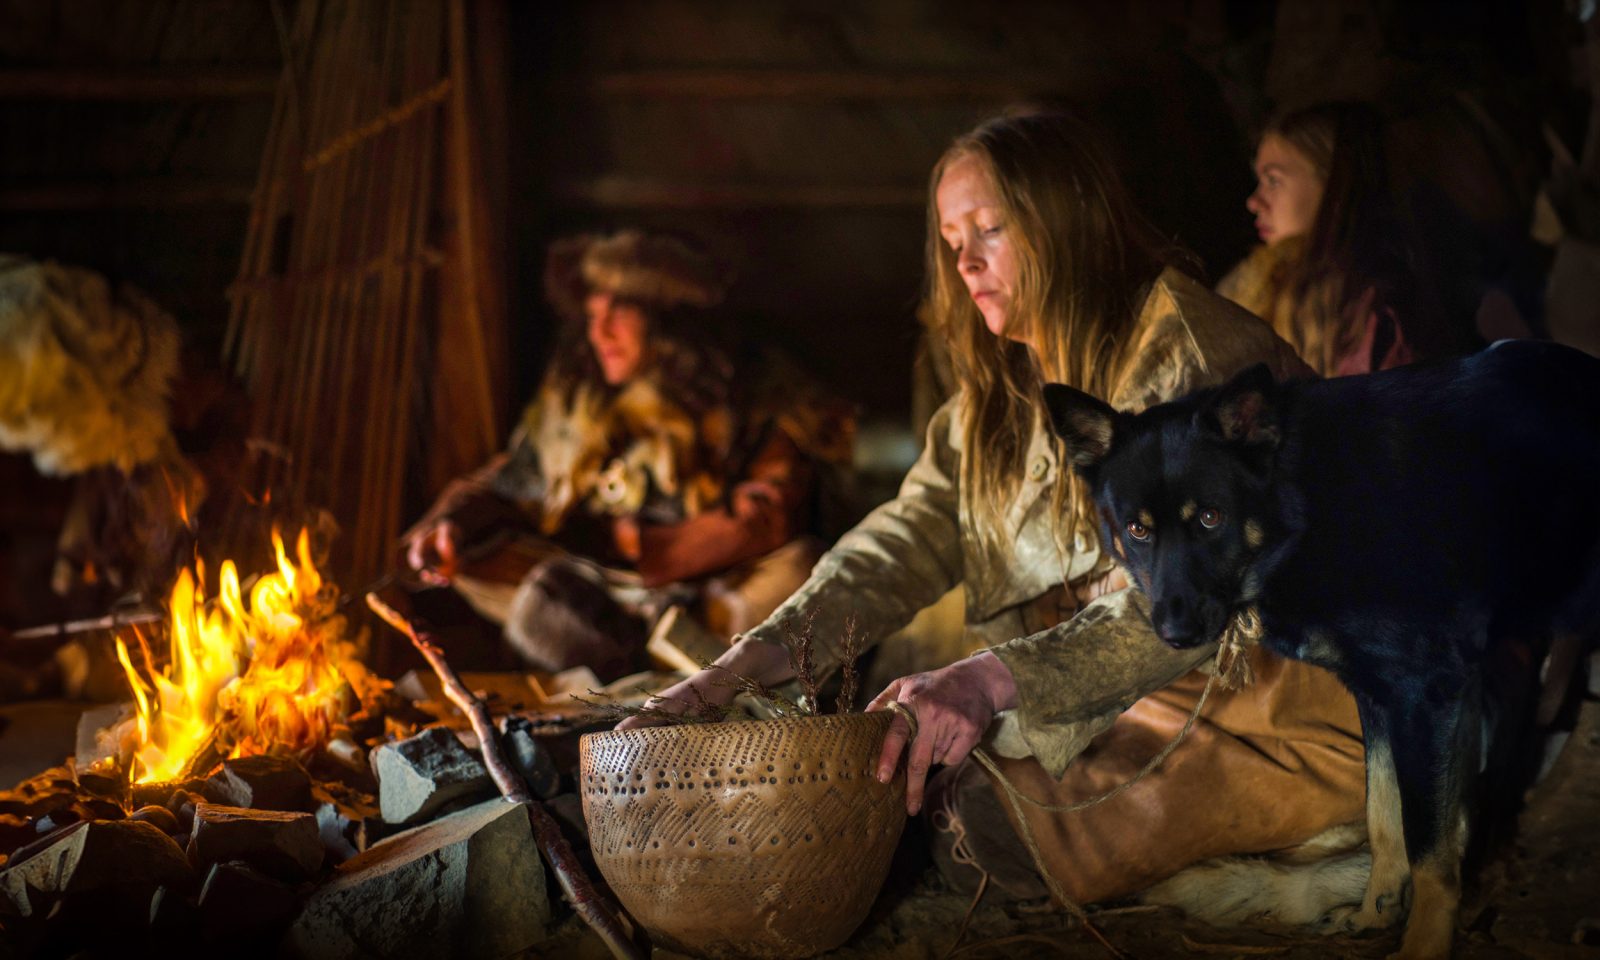 Interior view of a Stone Age dwelling. A woman cooks food in a large ceramic dish over a campfire.